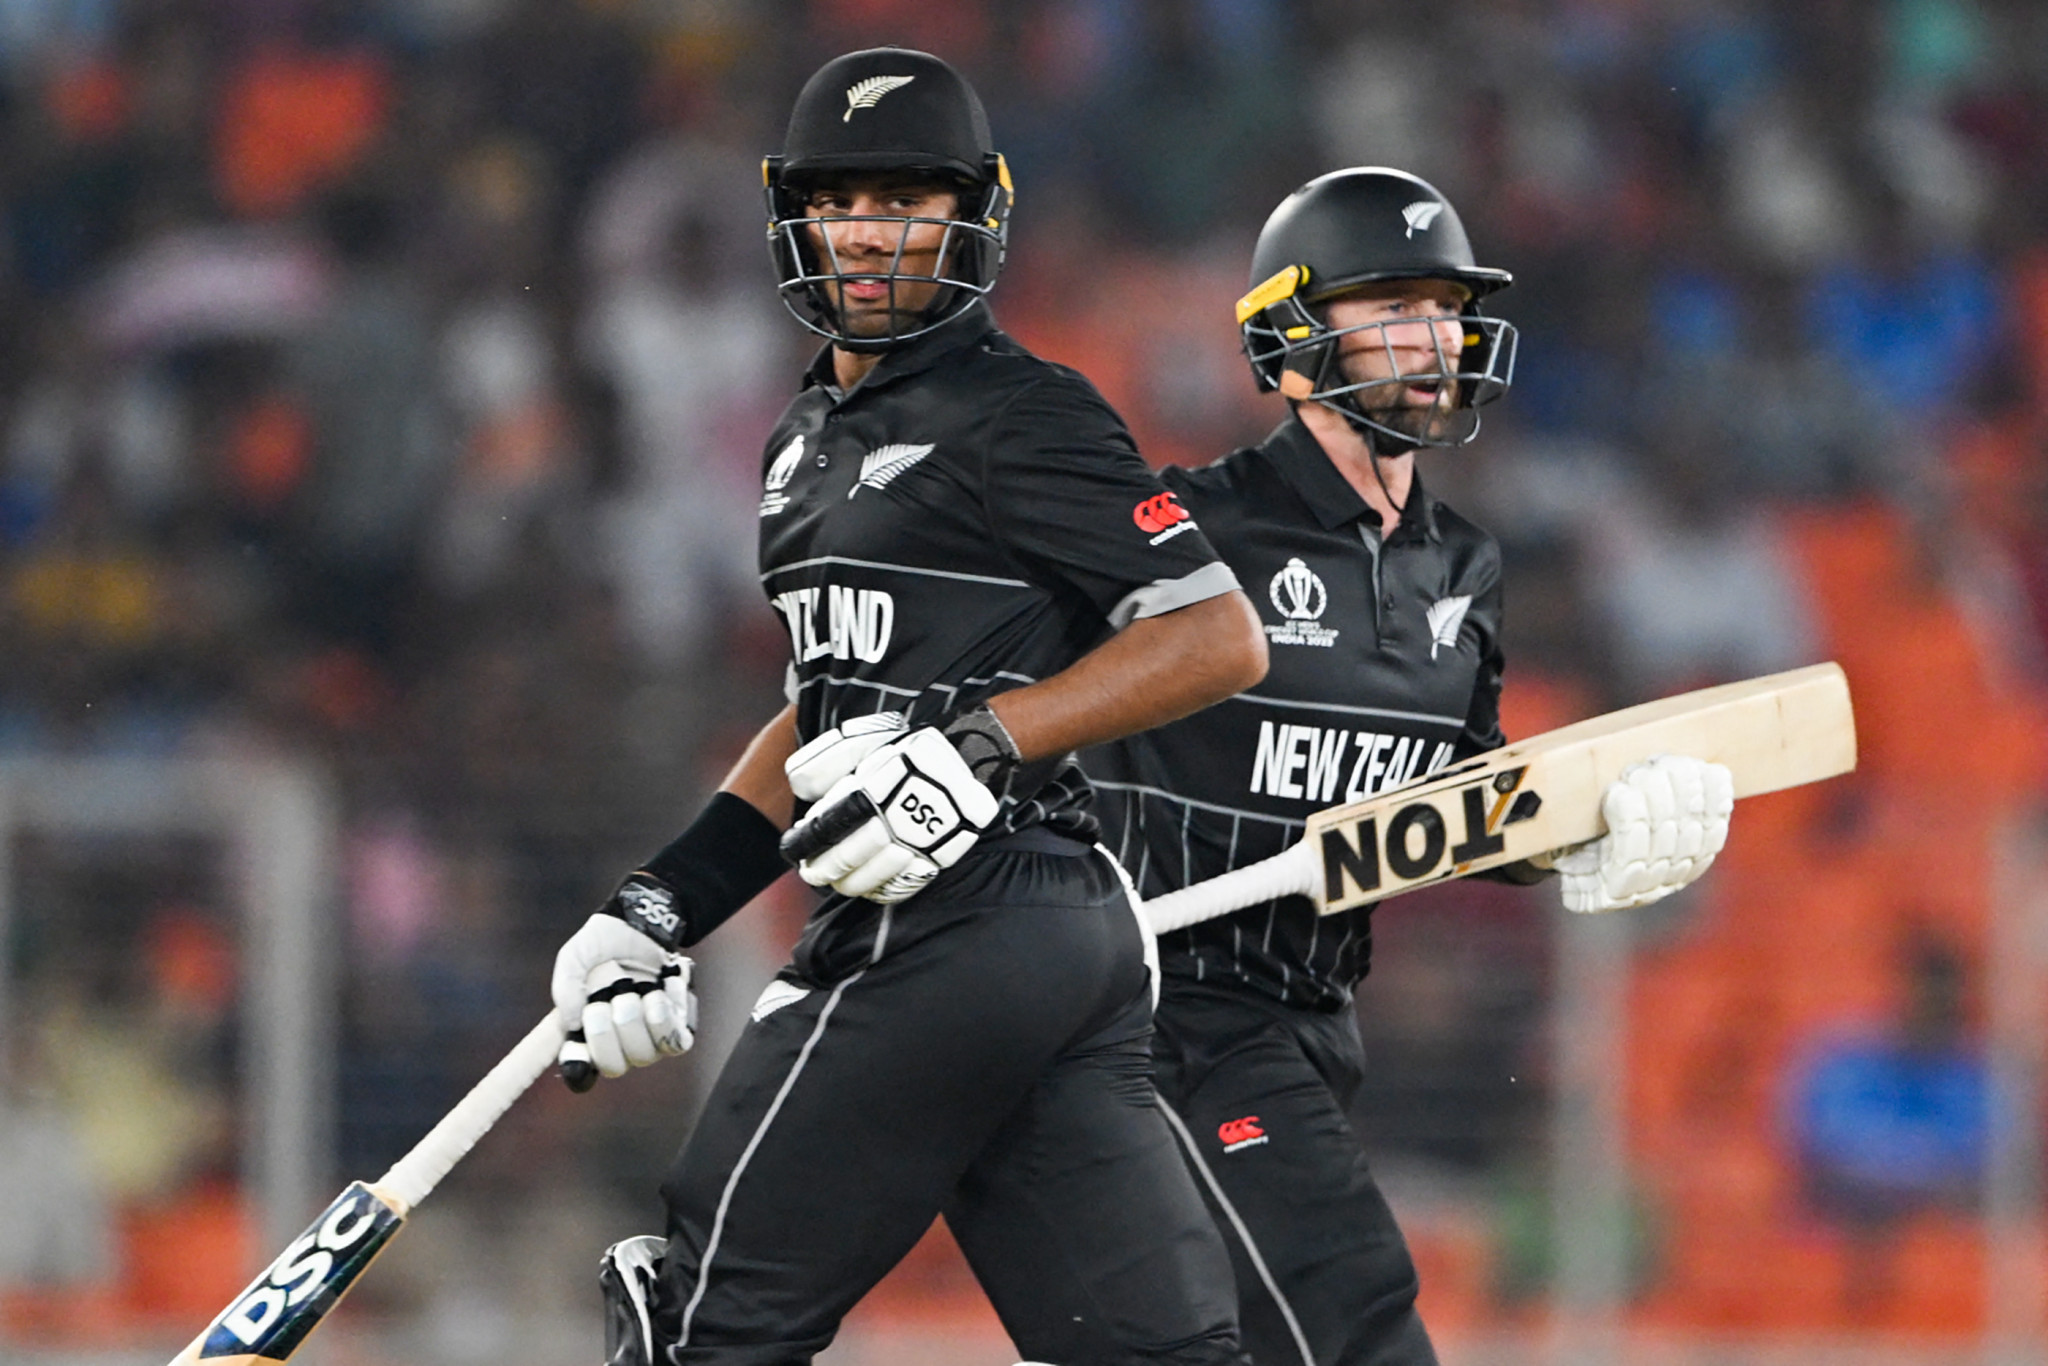 Rachin Ravindra, left, and Devon Conway, right, helped New Zealand to a dominant win in the first match of the ICC Men's Cricket World Cup against New Zealand ©Getty Images